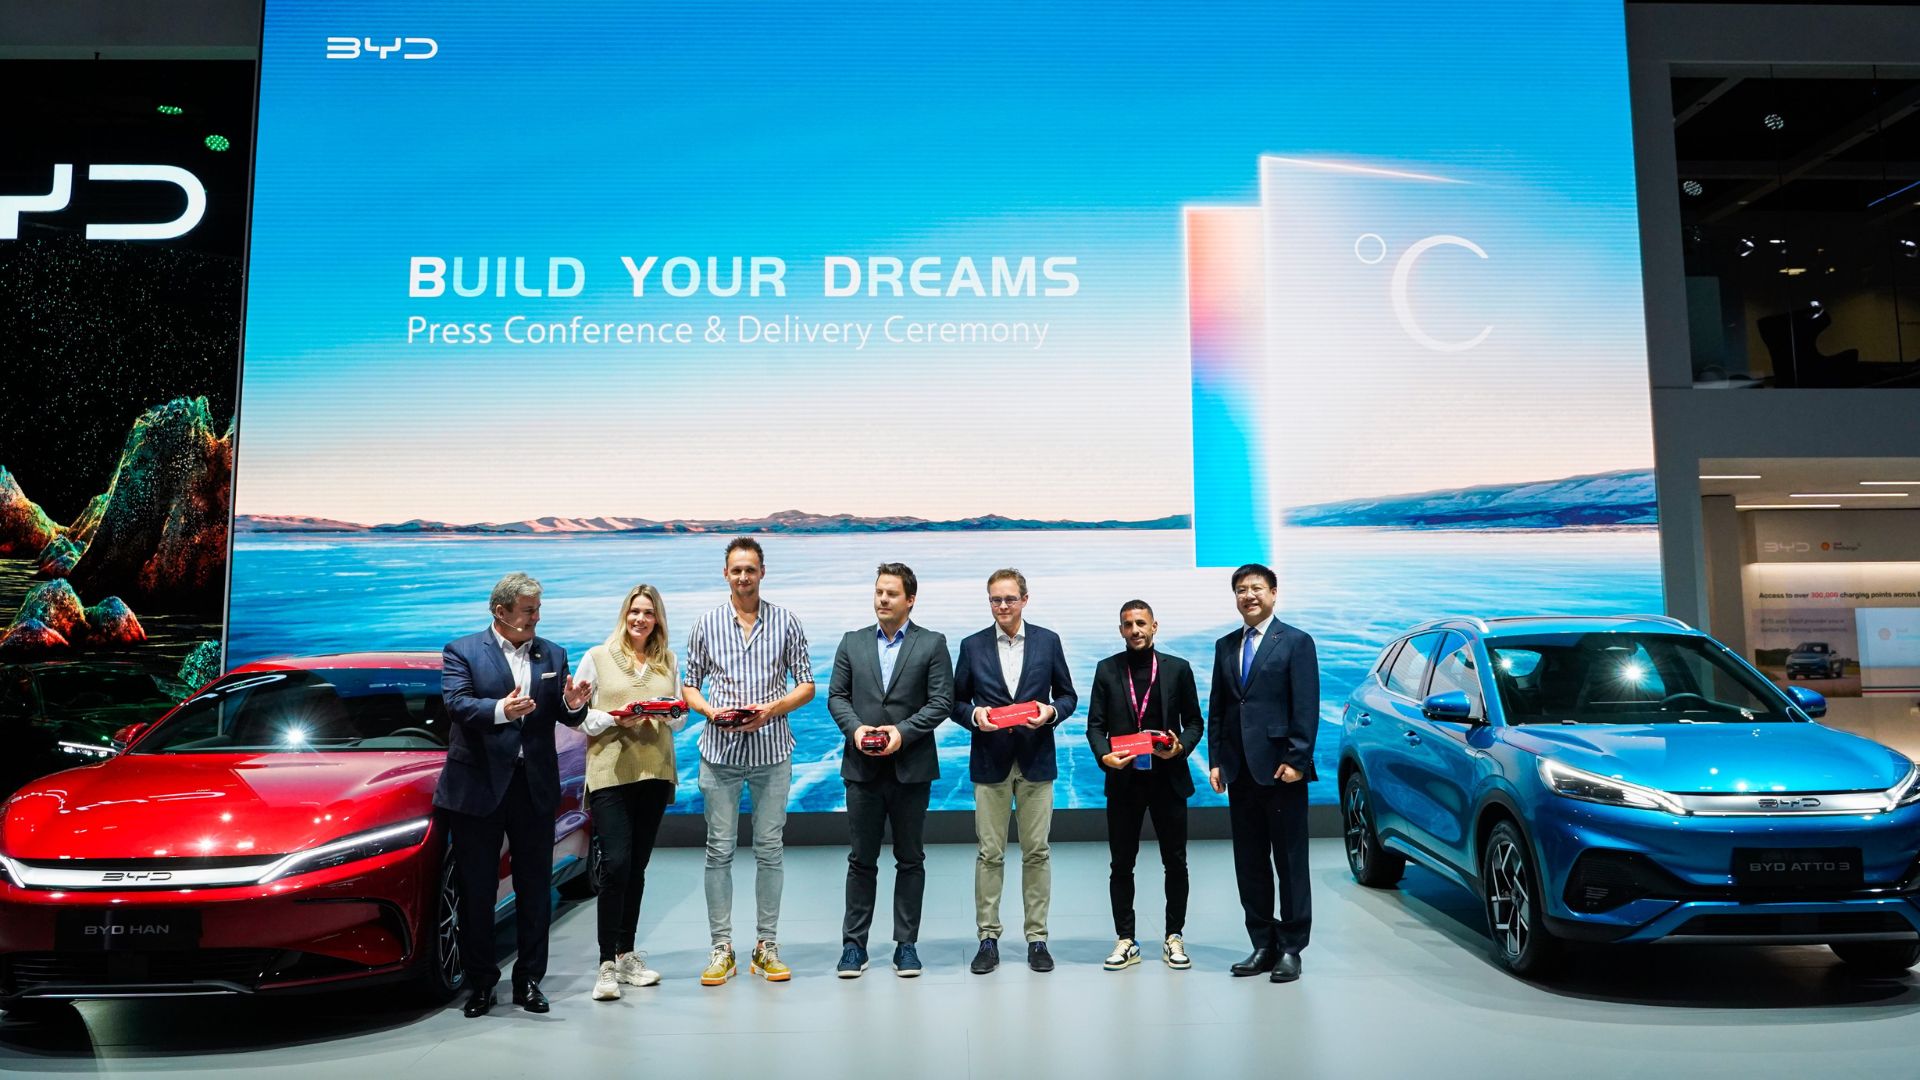 https://e-vehicleinfo.com/global/byd-launches-3-new-evs-at-the-paris-motor-show/